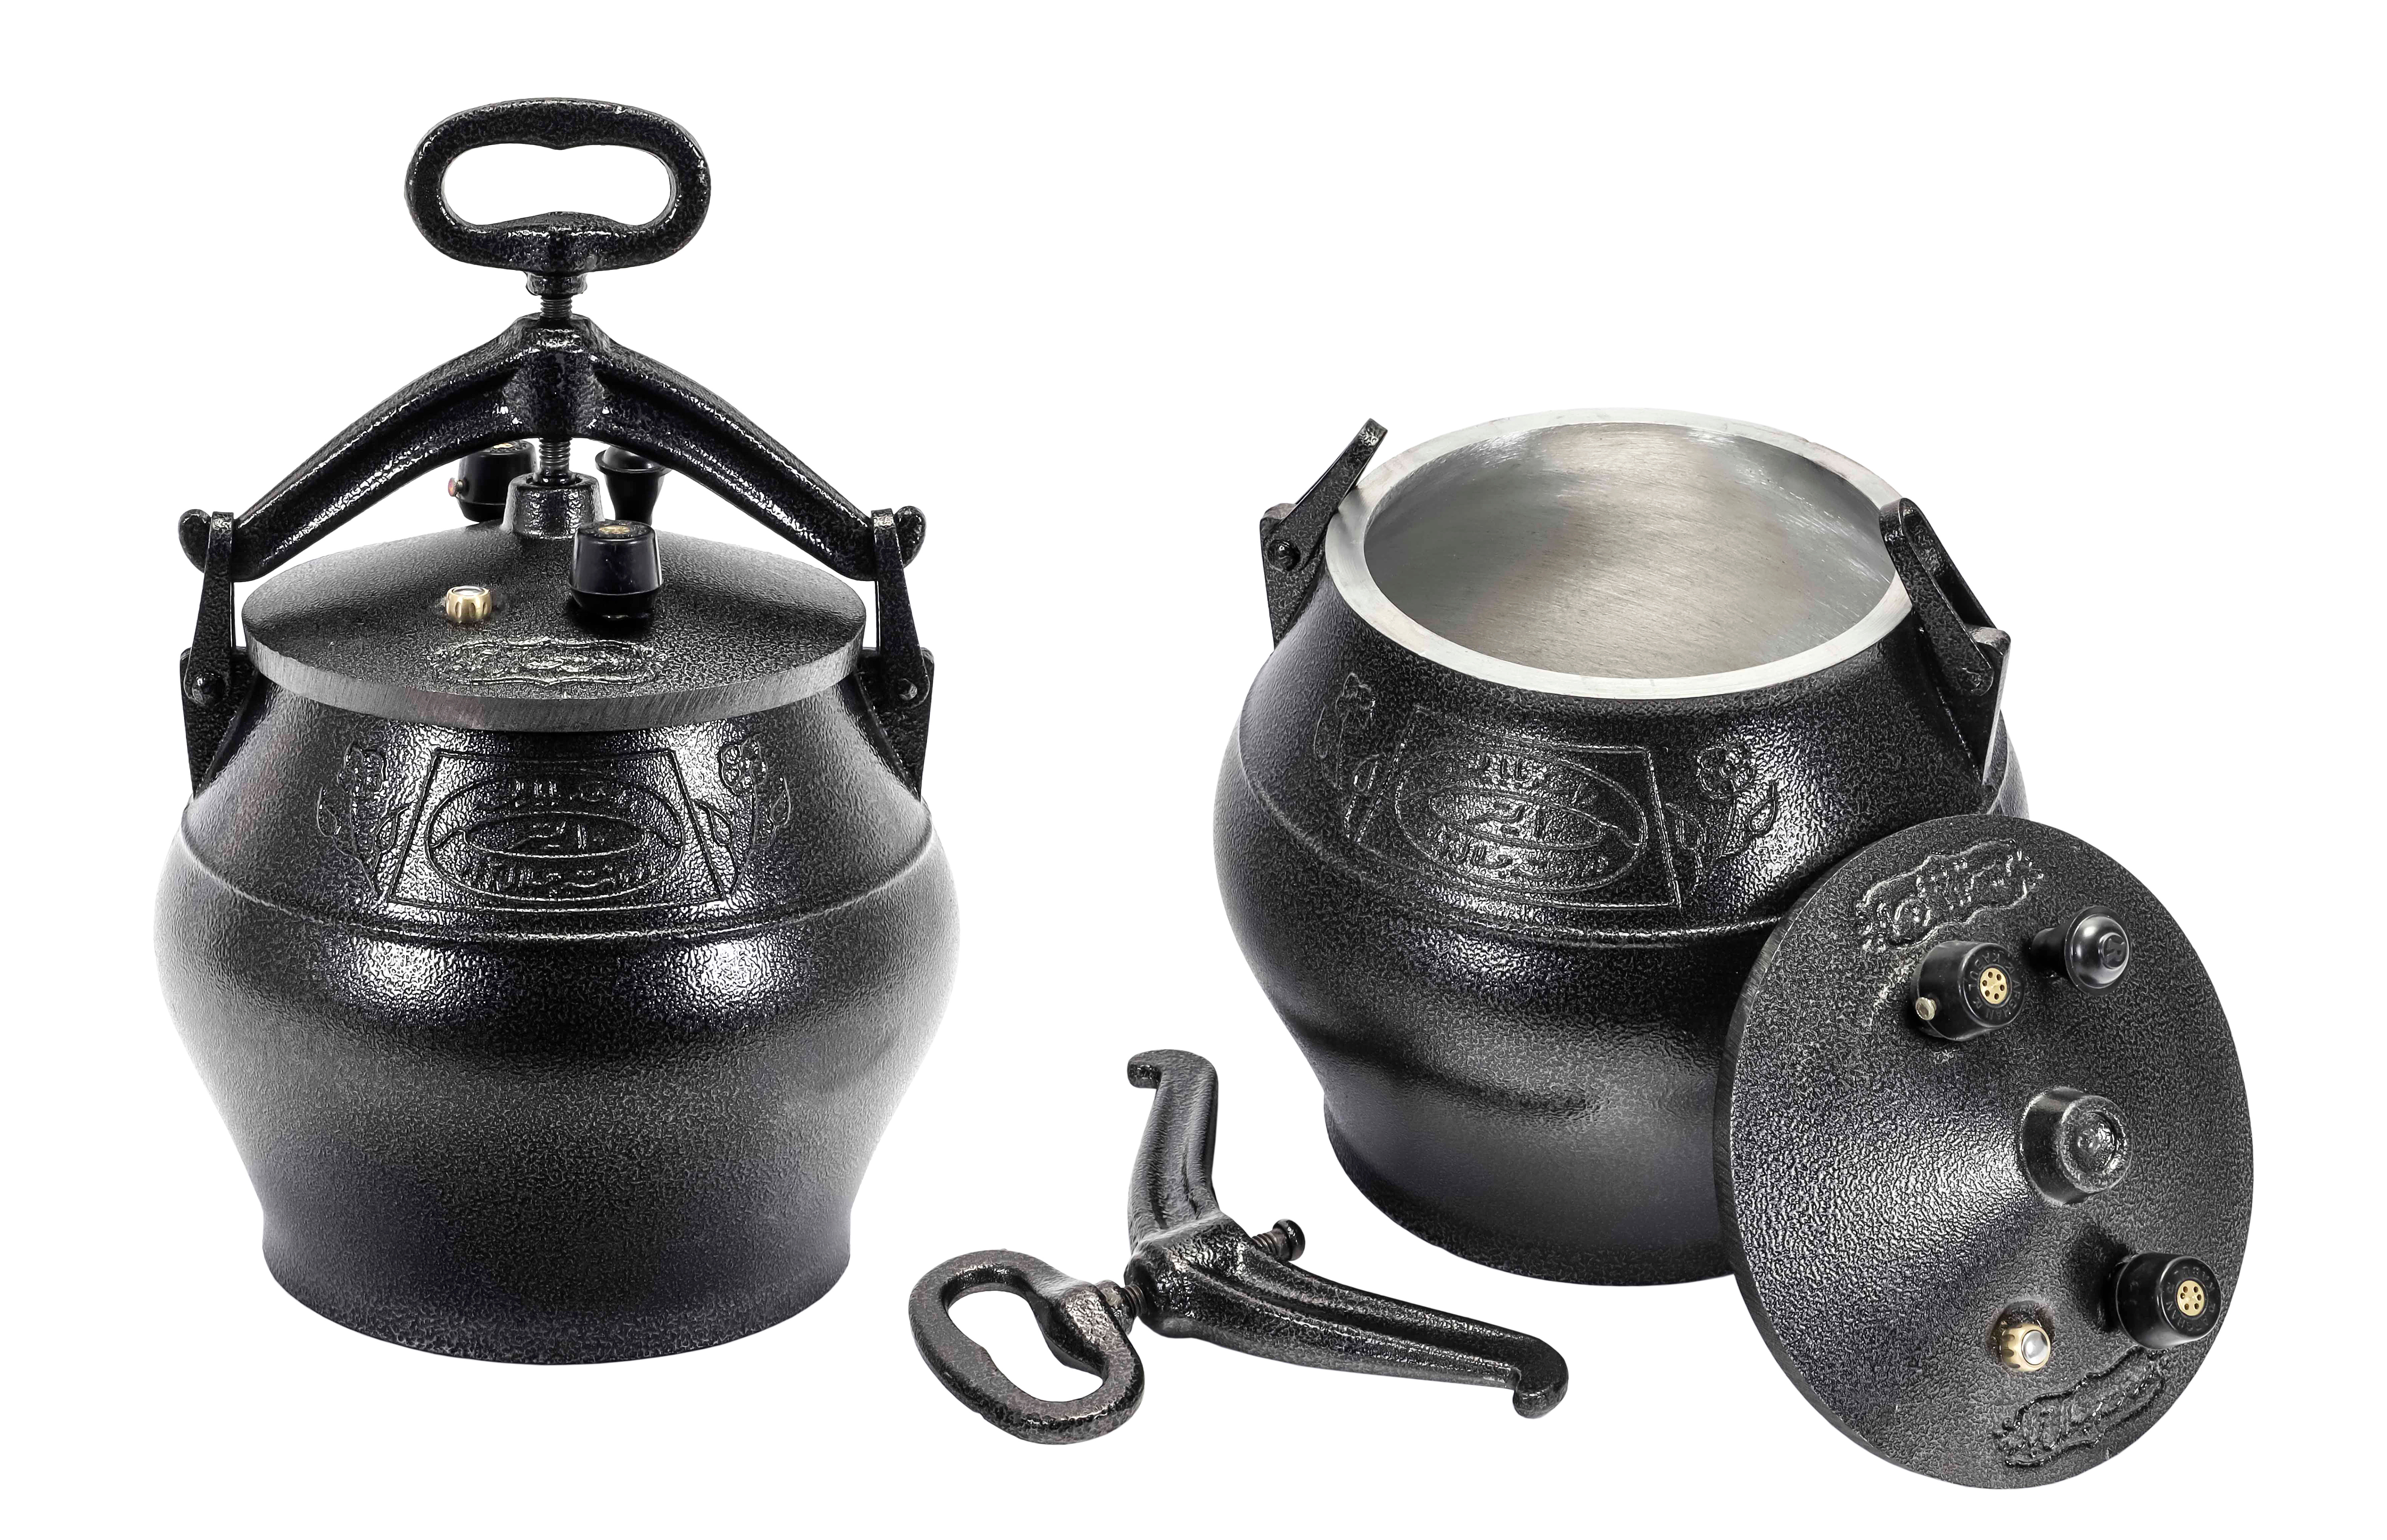 Black metal pressure cookers with decorative elements--which contain toxic lead